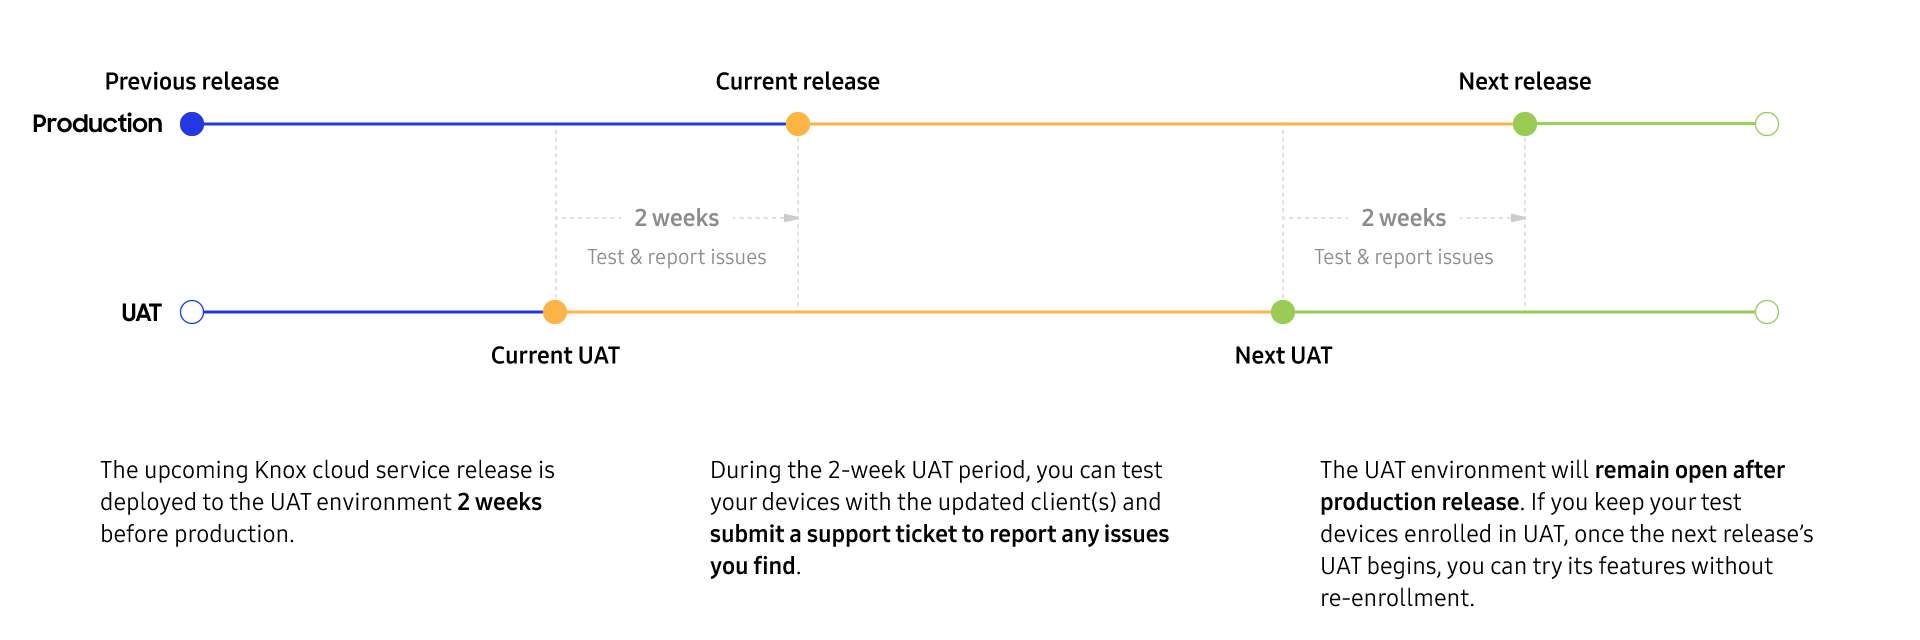 Two horizontal timelines covering production releases and UAT testing periods. The UAT timeline is separated into three release cycles: 'Previous', 'Current', and 'Next'. Prior to each phase is a UAT phase, which lasts 2 weeks. The production timeline charts the same events, but with production launches staggered and occurring two weeks after the start of the UAT phases.